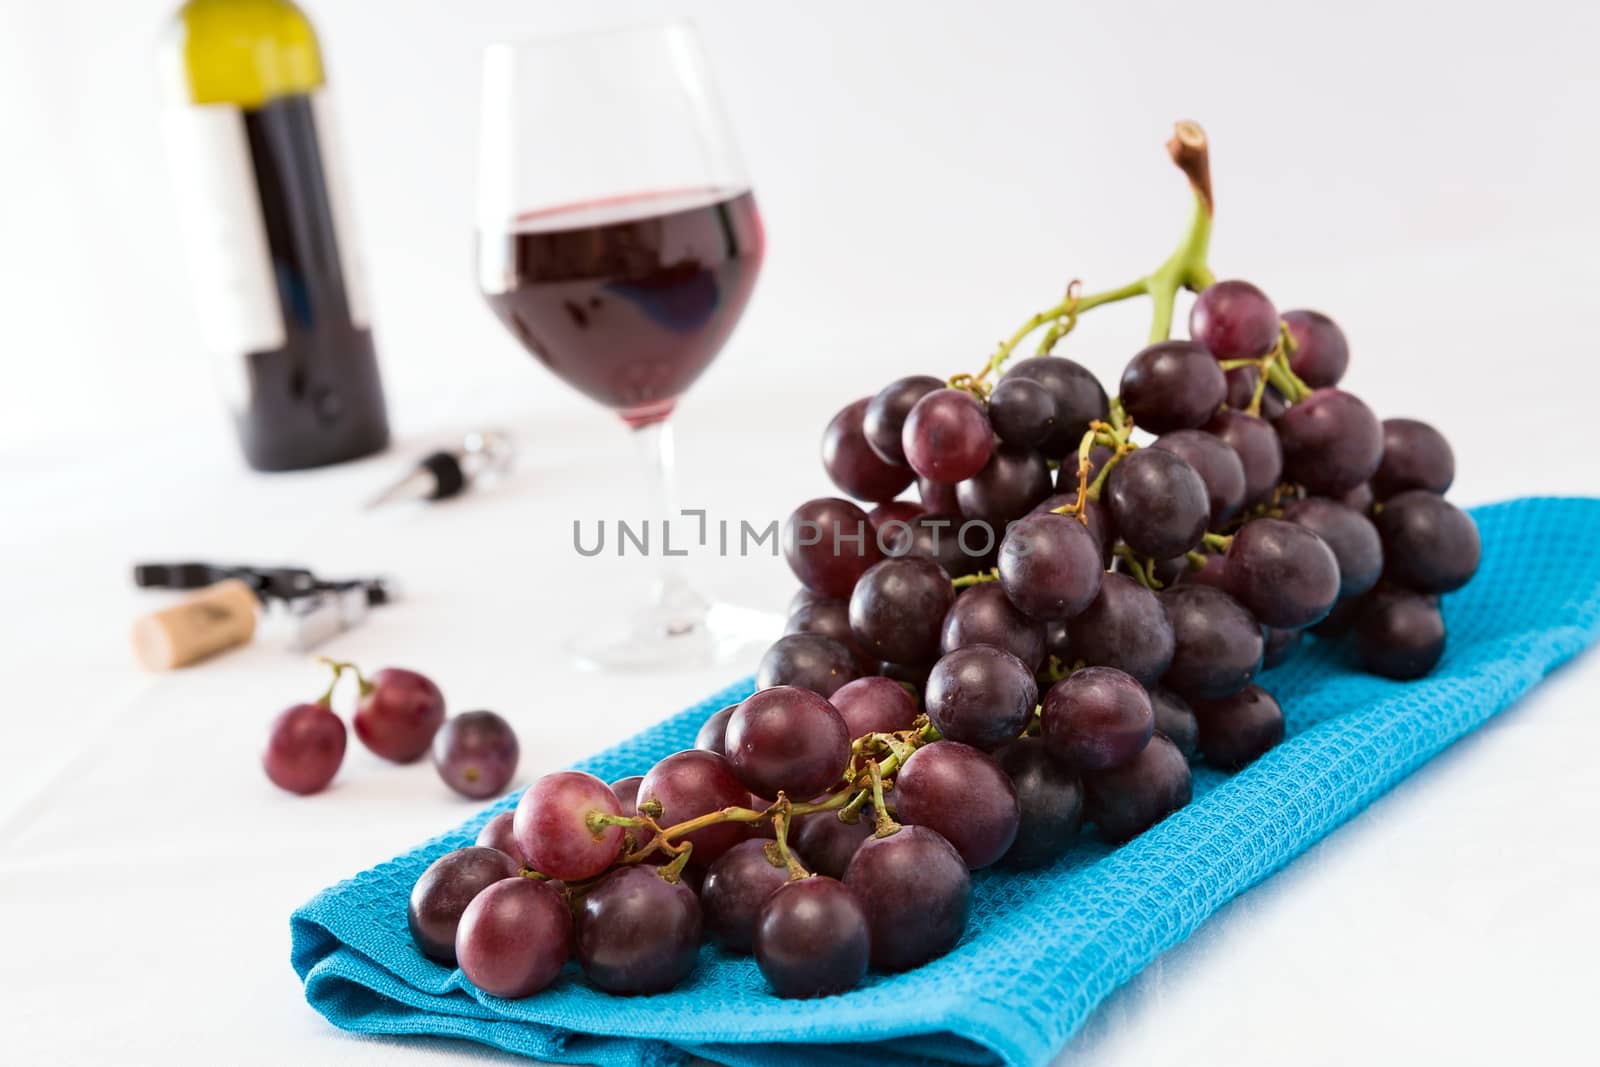 Closeup of a bunch of red grapes and a glass of red wine with a wine bottle on background over a blue tablecloth